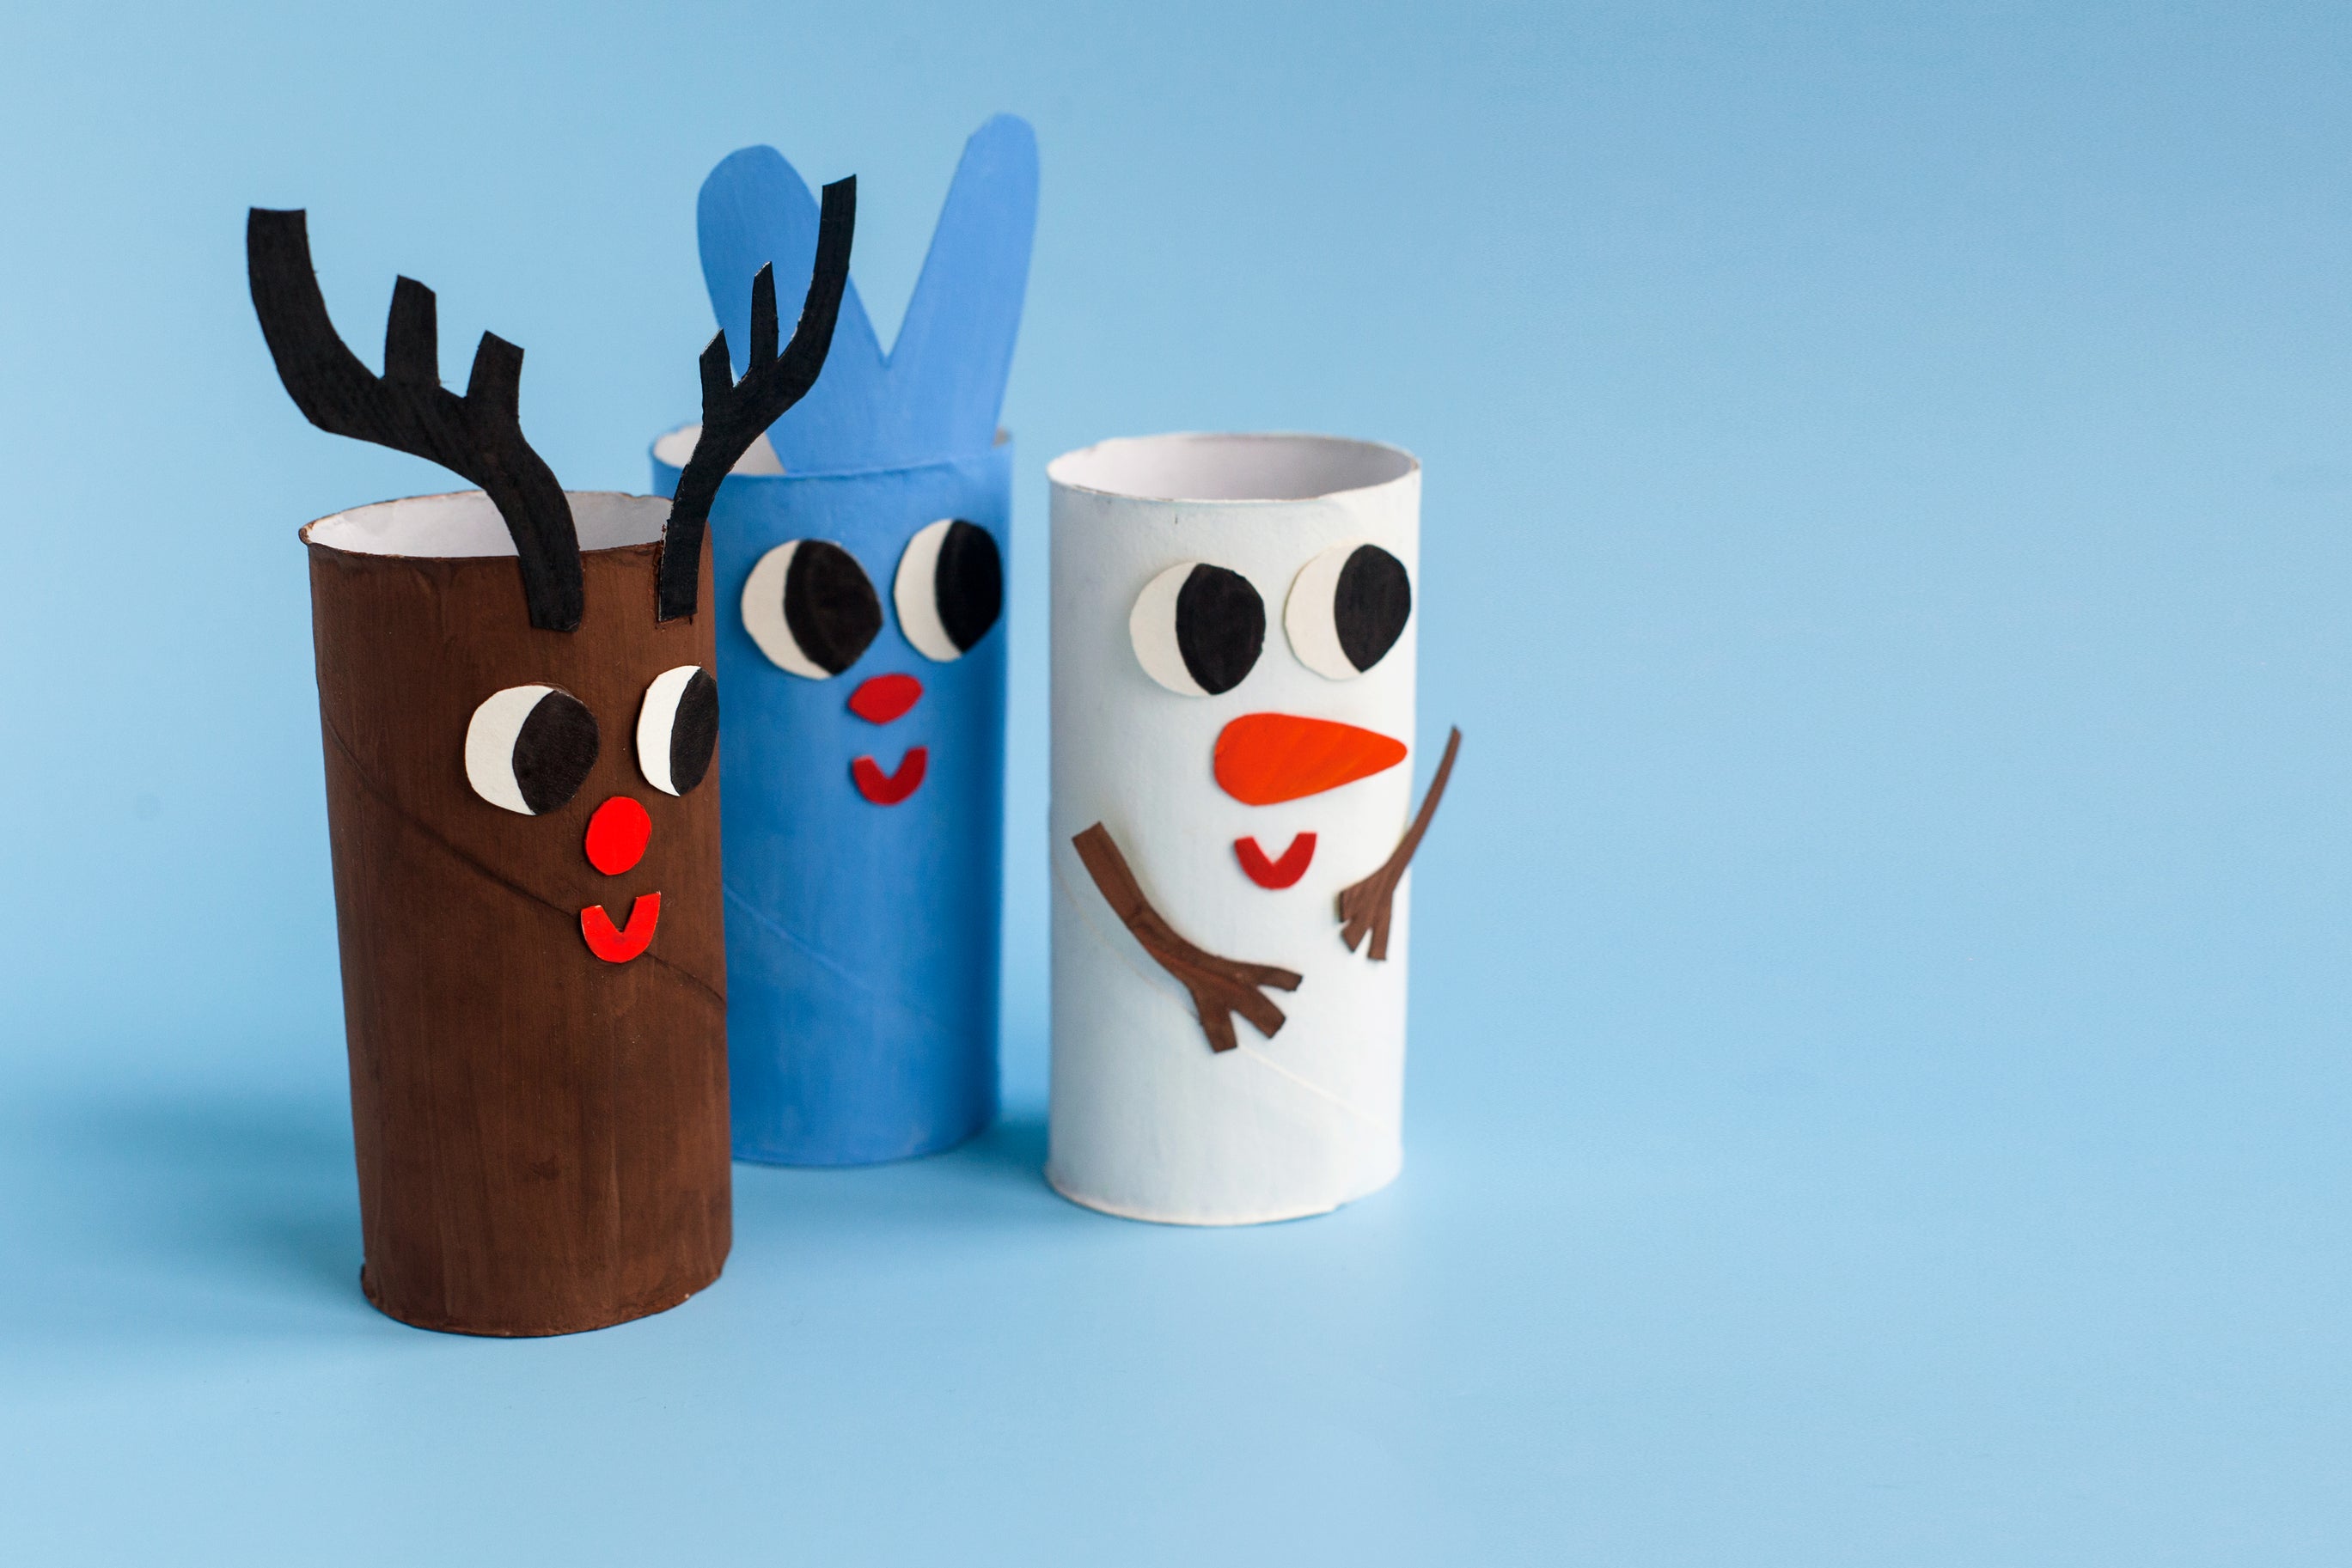 DIY paper towel or toilet roll toys for babies featuring a deer, rabbit, and snowman